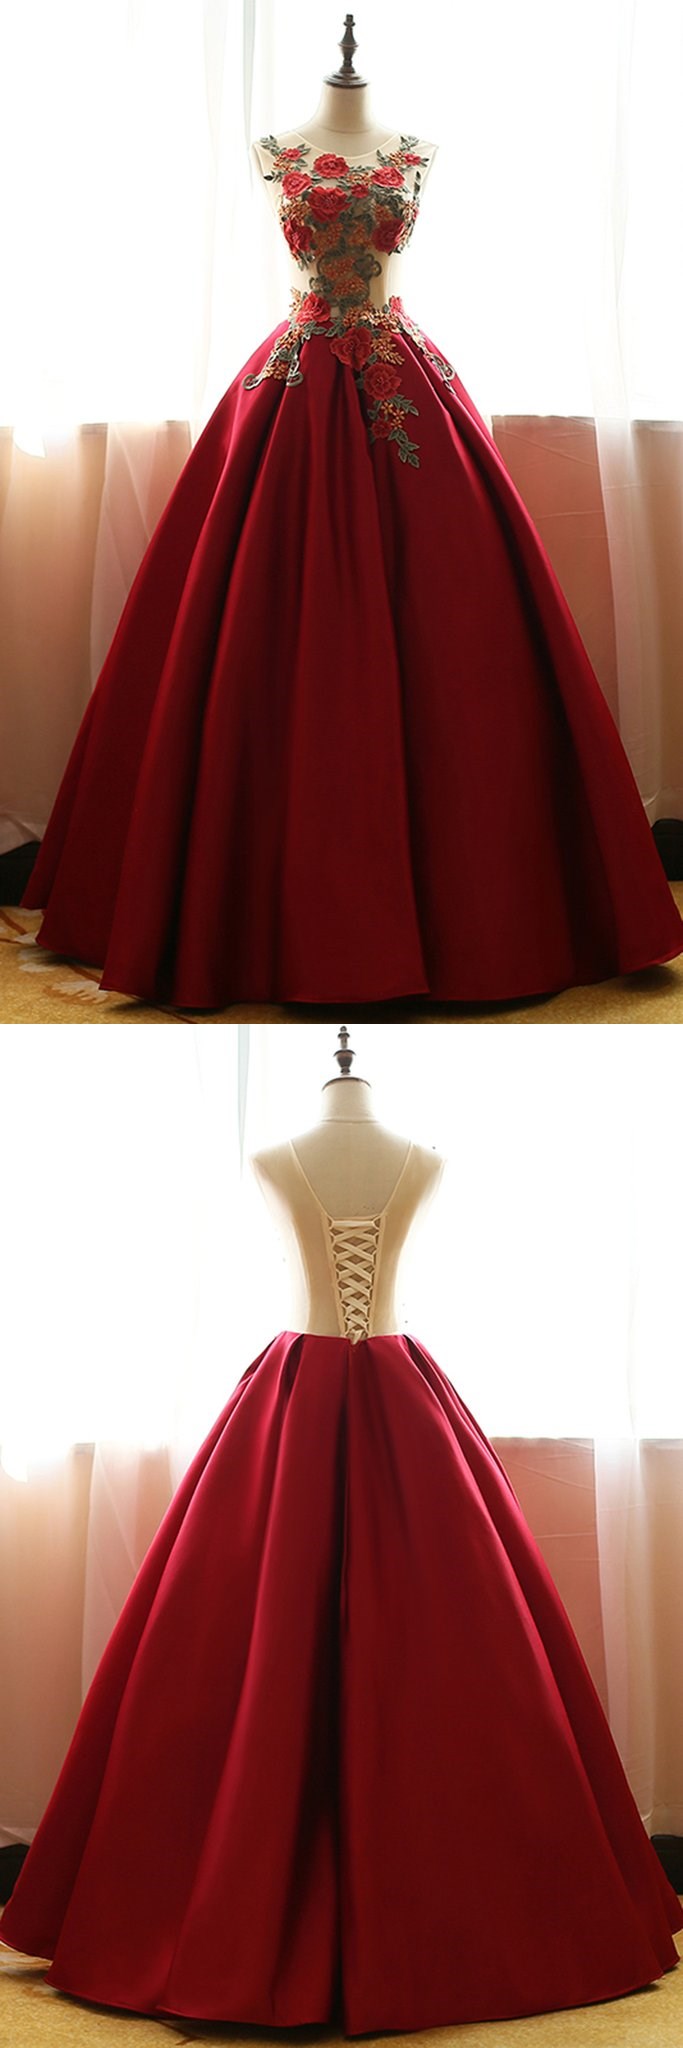 Red Chiffon Satins Rose Applique Round Neck A-line Long Prom Dresses,ball Gown Dresses